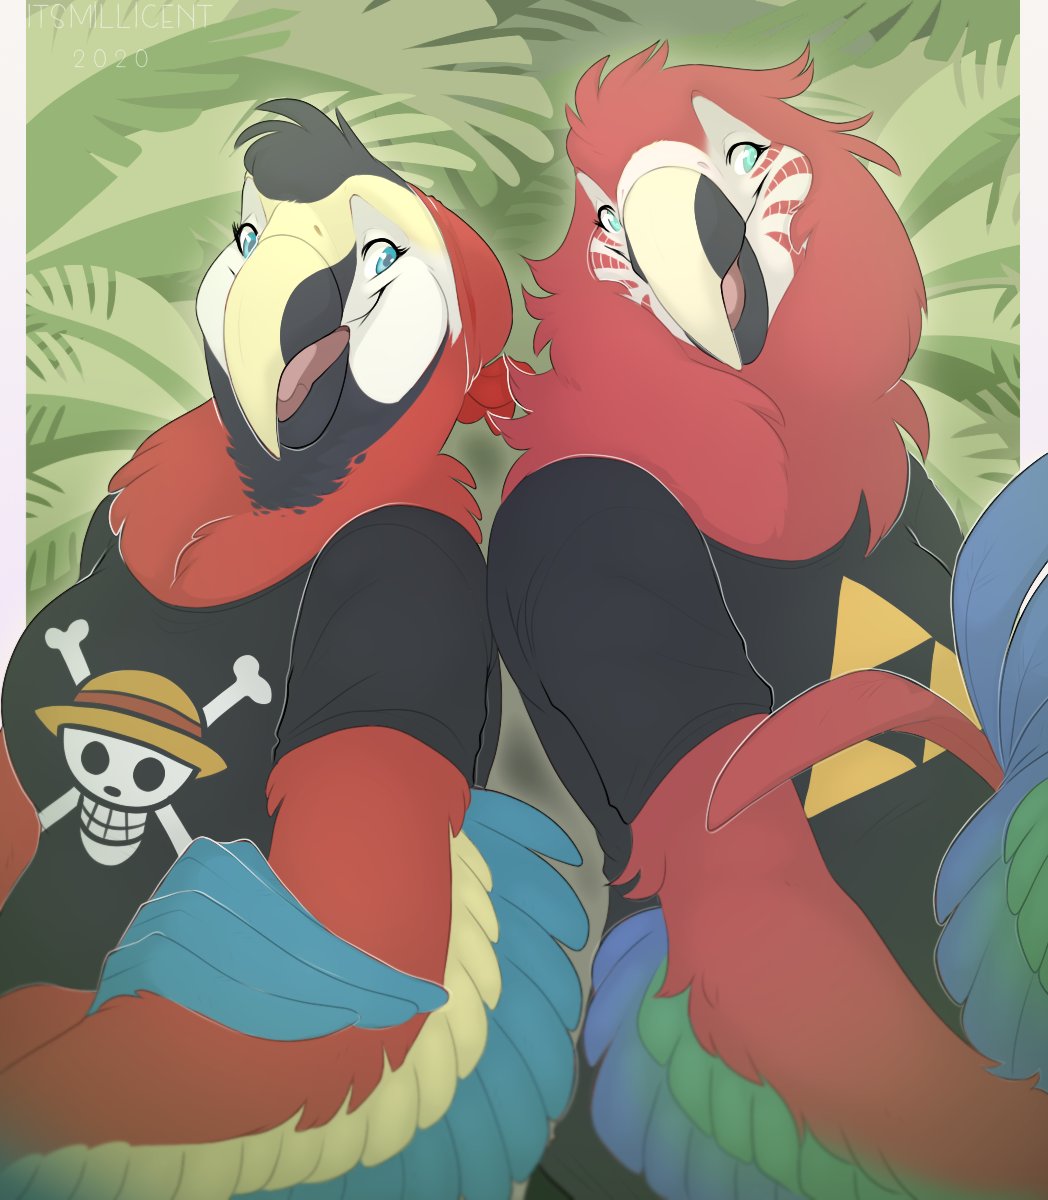 It is indeed summer and we are indeed hot birds, so that must mean it's #HOTBIRDSUMMER for Me and Mill! 

Lovely art by @bird_attitude